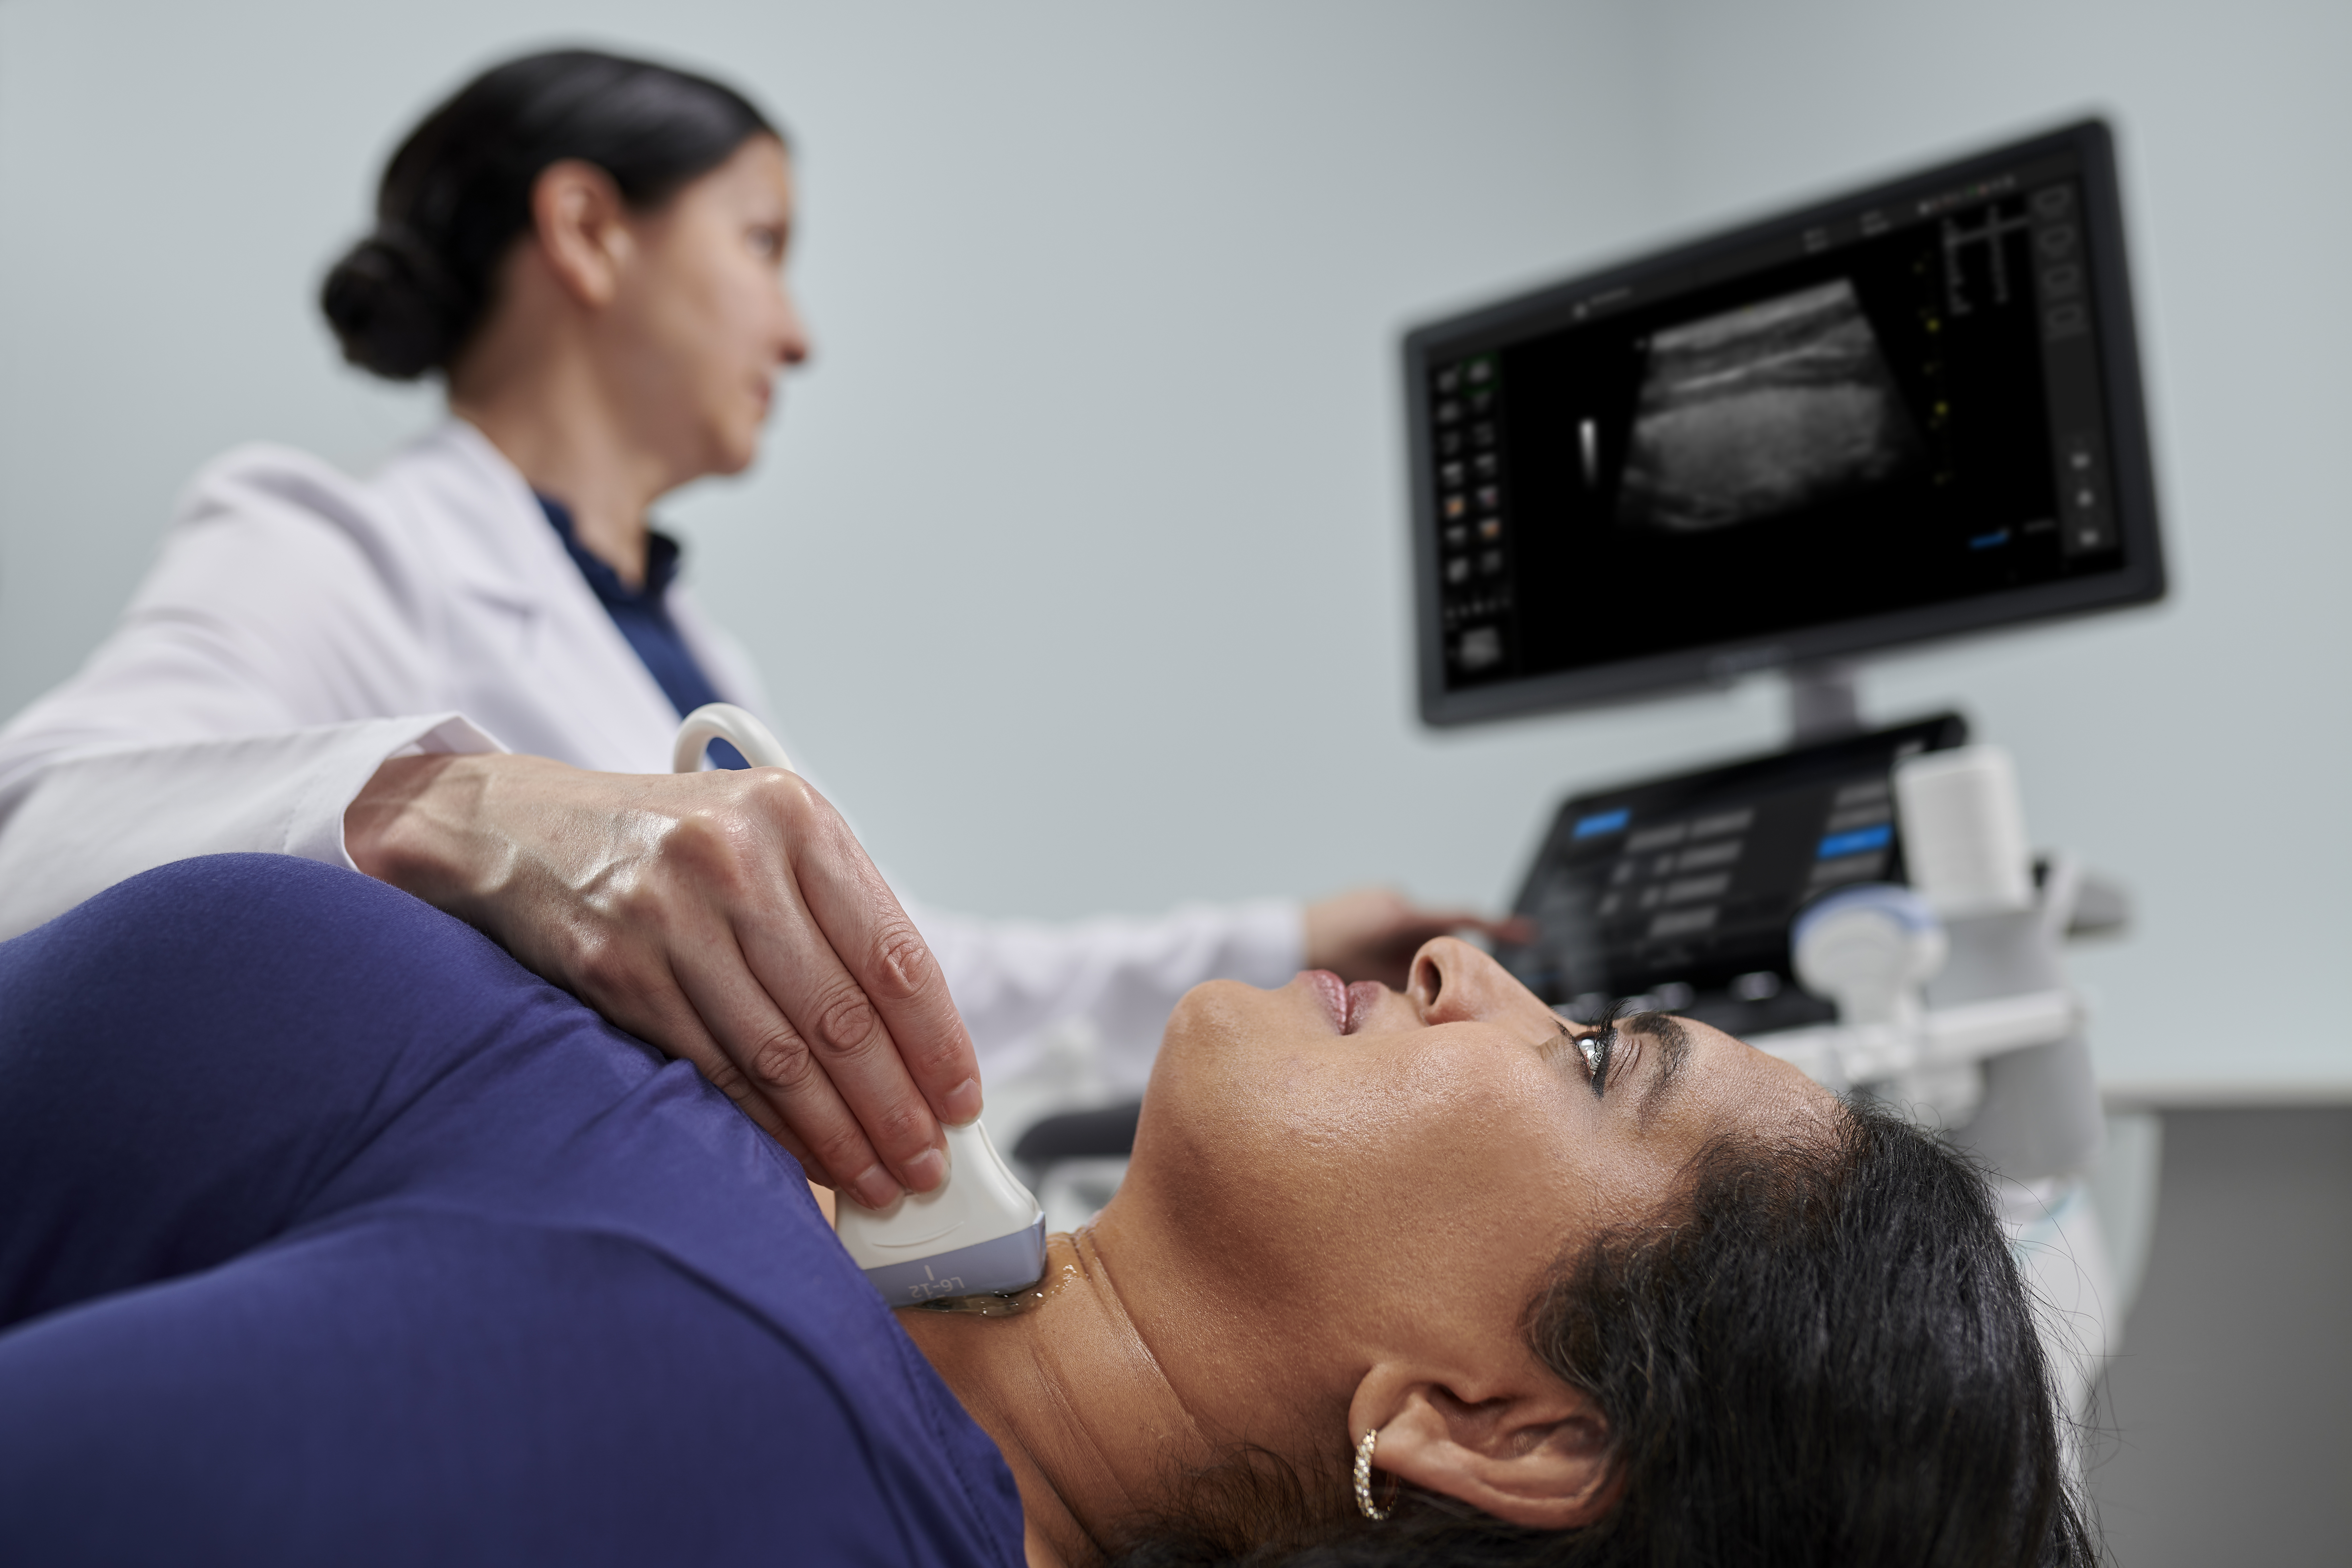 Ultrasound has several applications in primary care, including abdominal, thoracic and vascular exams.